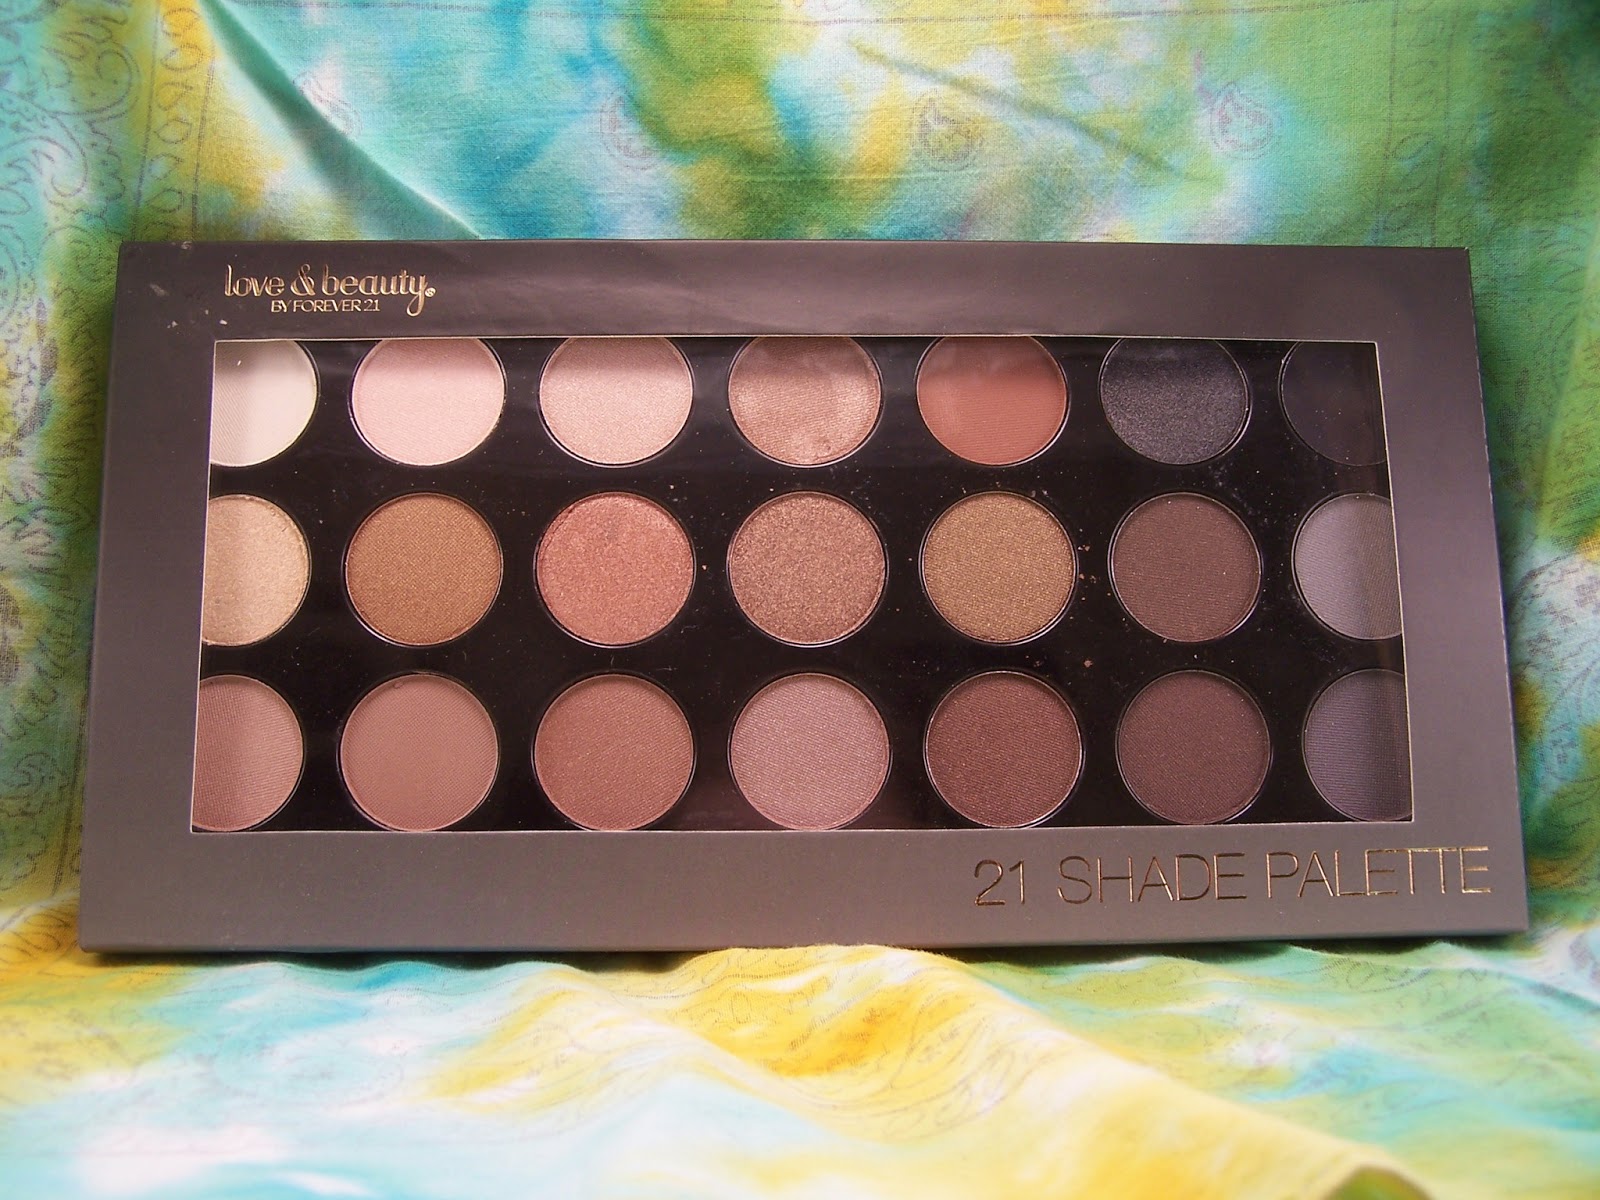 Forever 21 Love  Beauty BrownTaupe Eyeshadow Palette